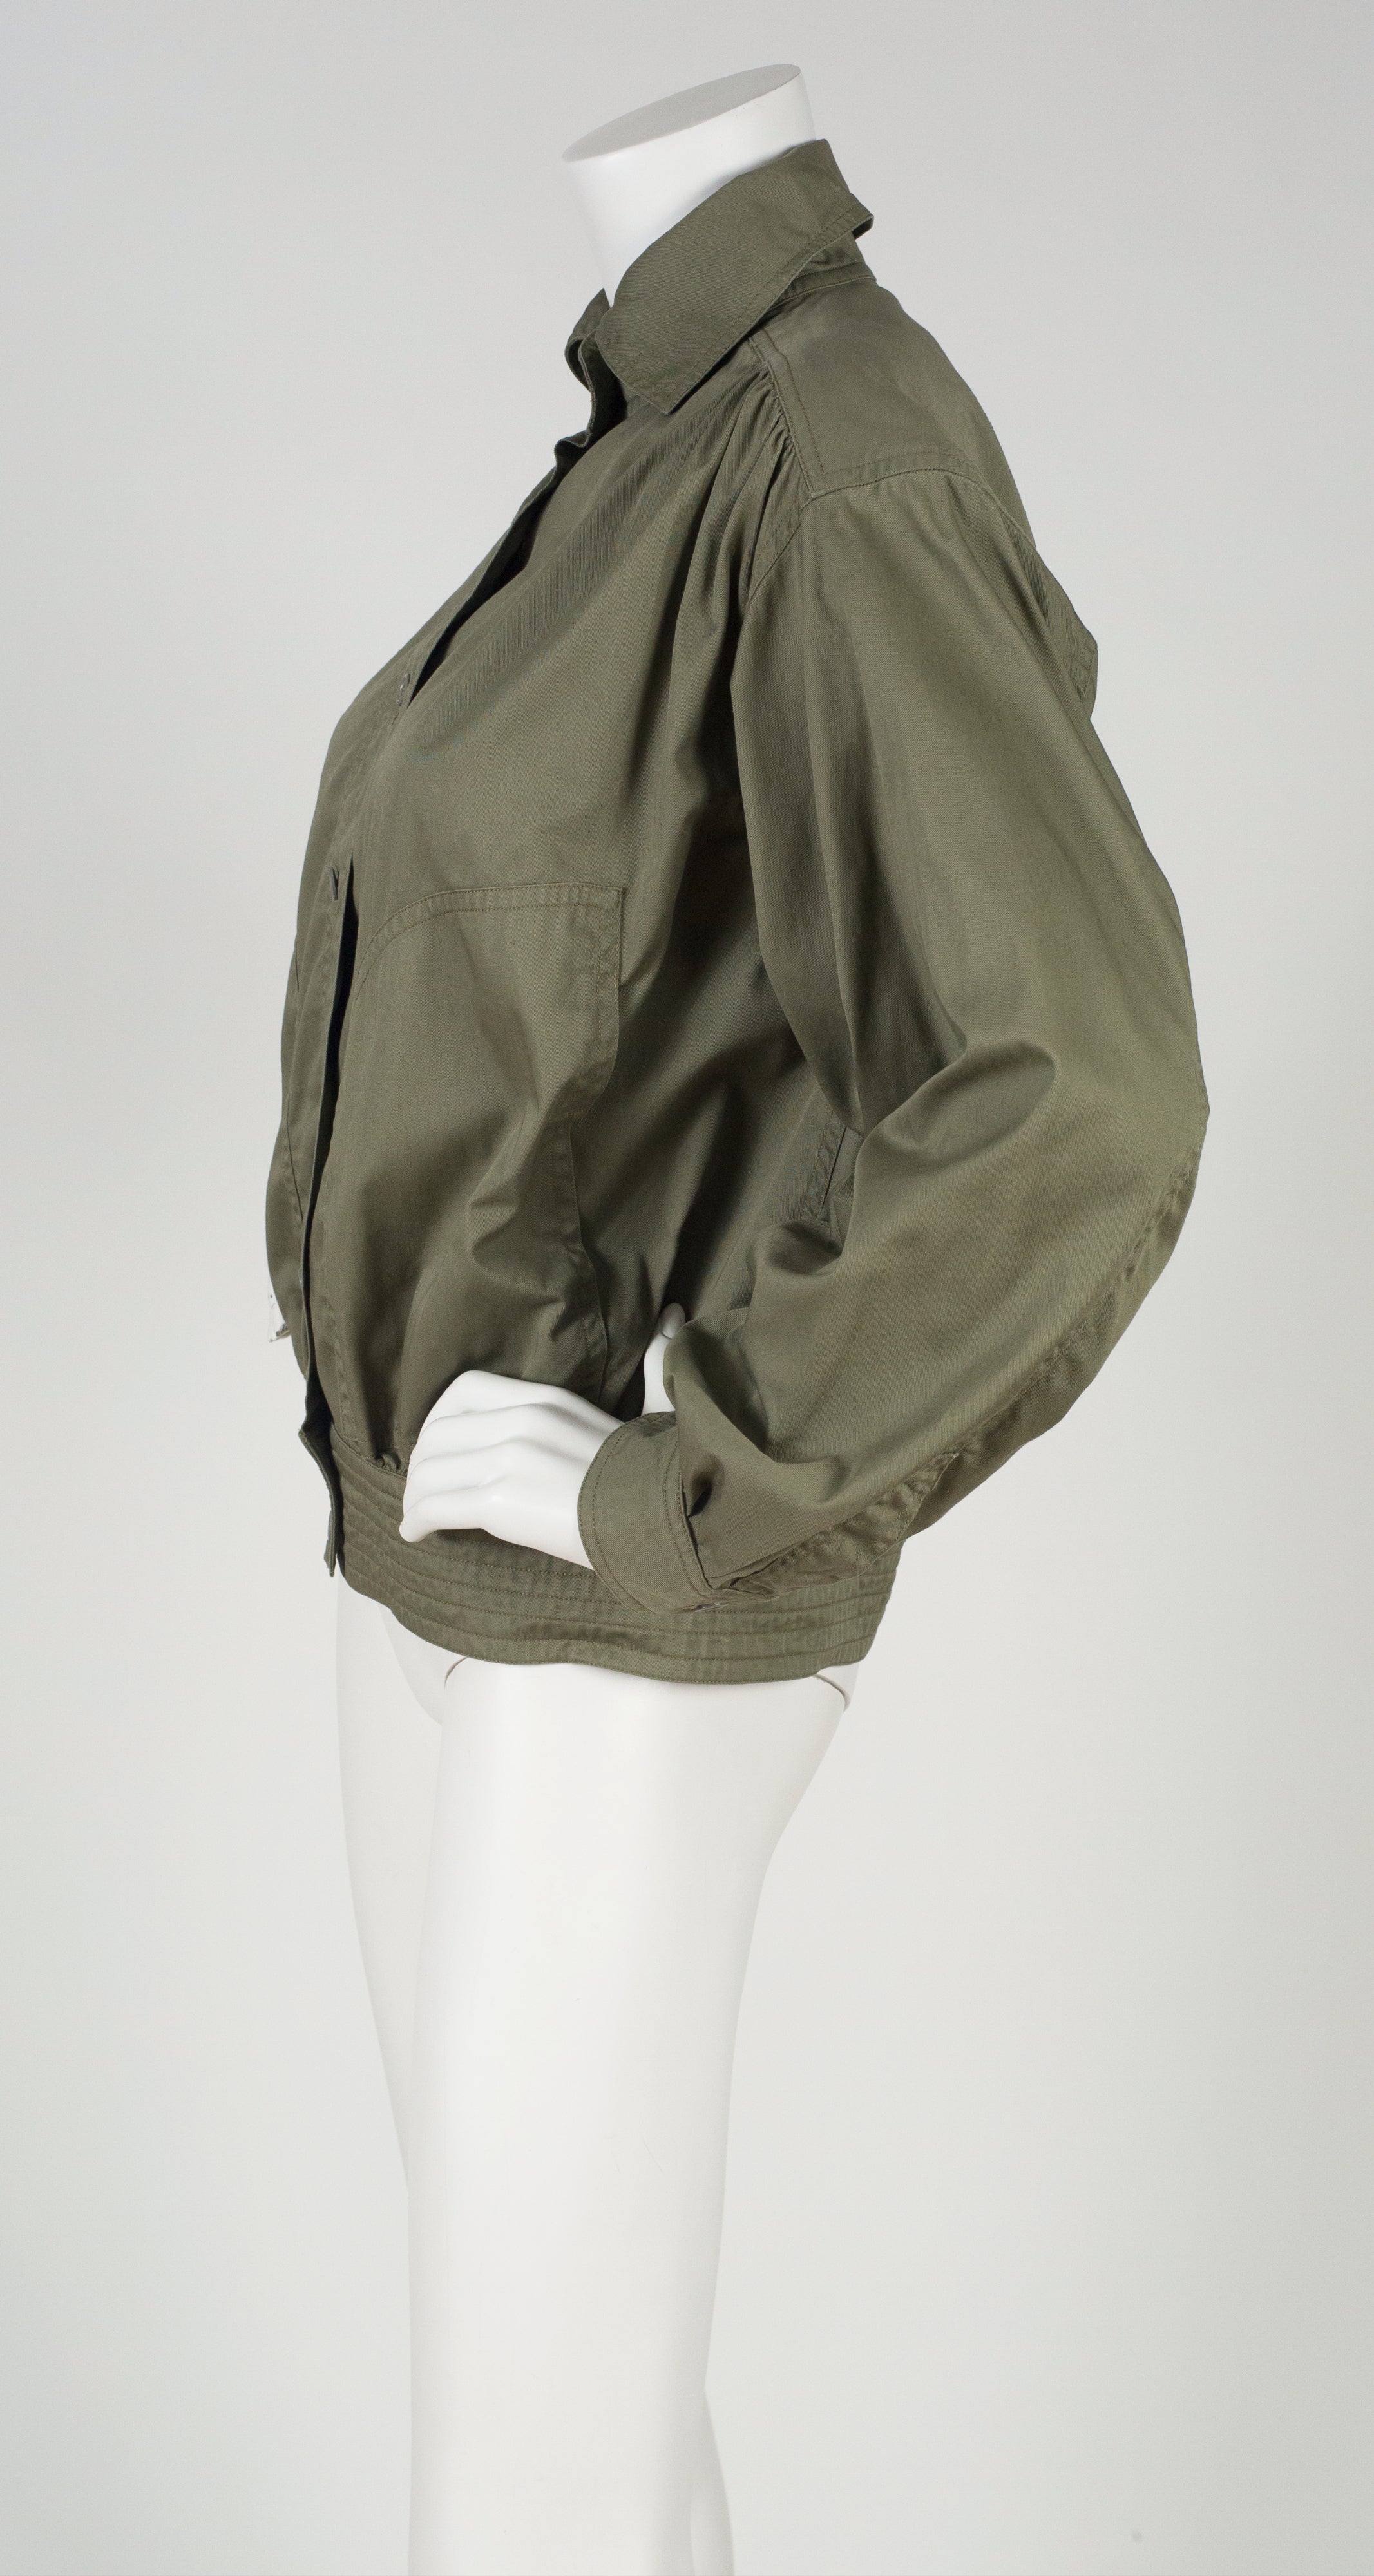 1978 S/S Army Green Cotton Bomber Jacket